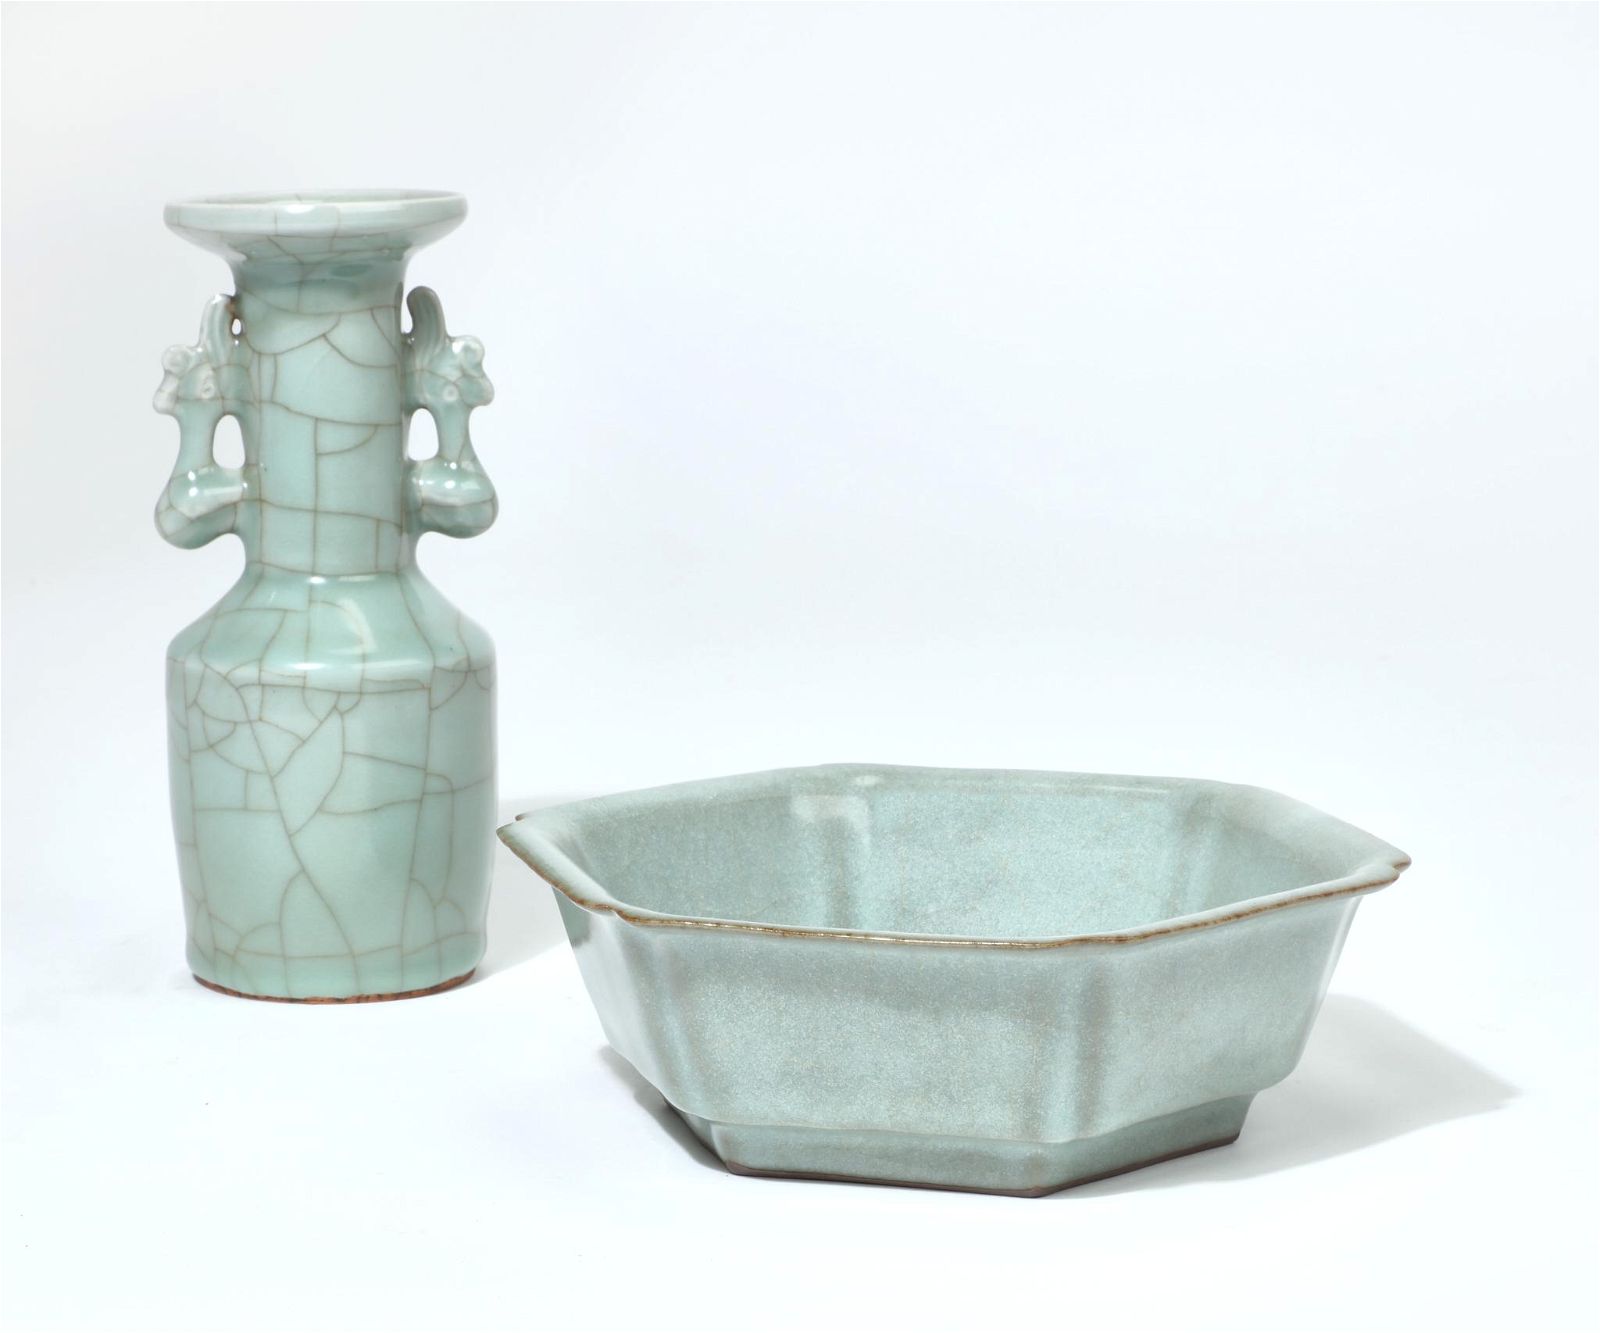 TWO CHINESE CELADON CRACKLE GLAZED